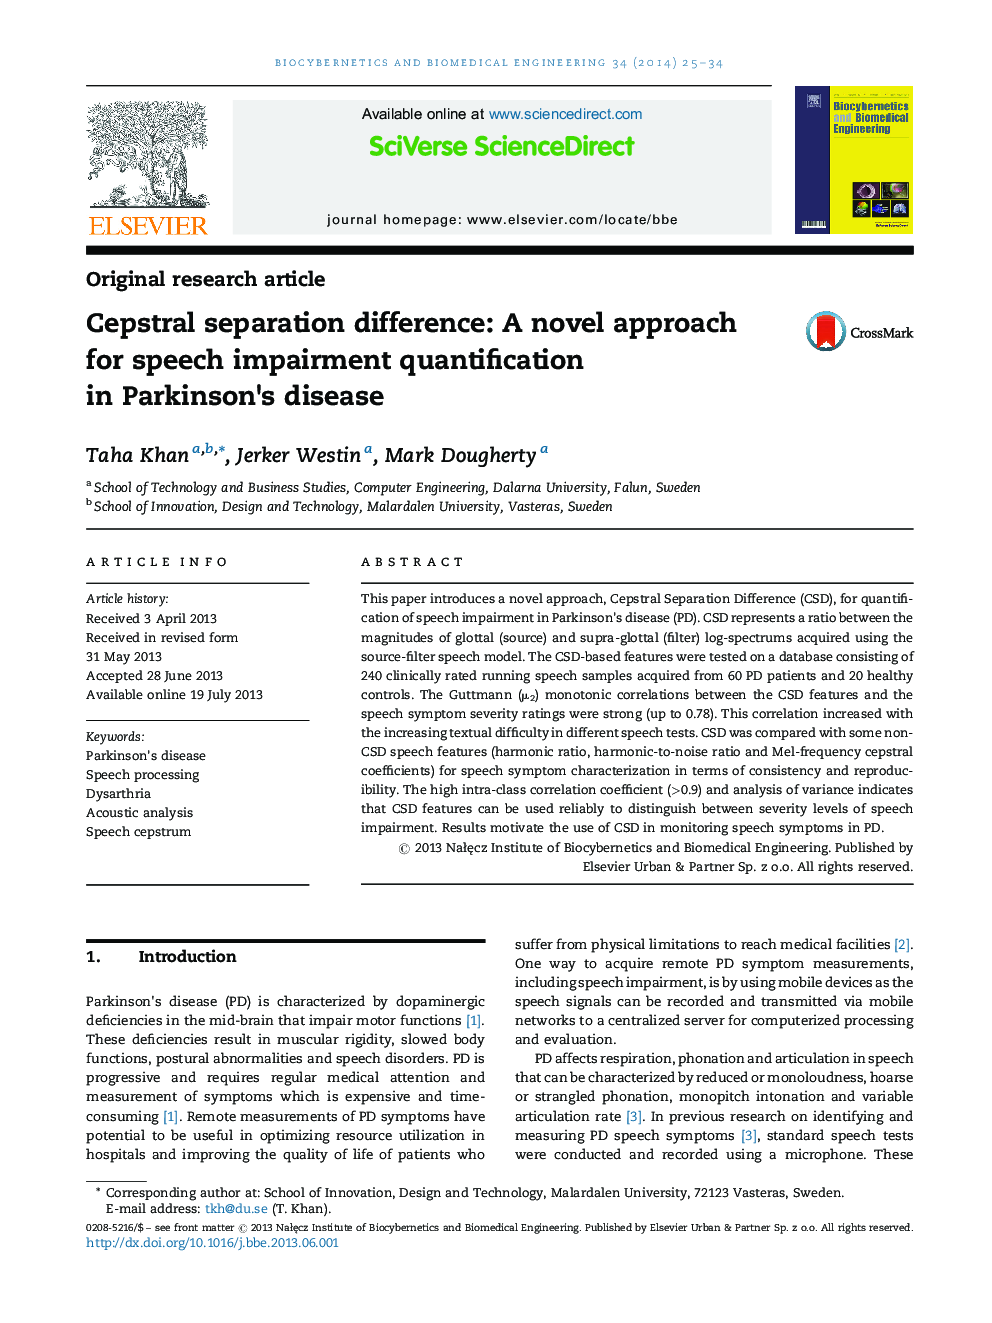 Cepstral separation difference: A novel approach for speech impairment quantification in Parkinson's disease